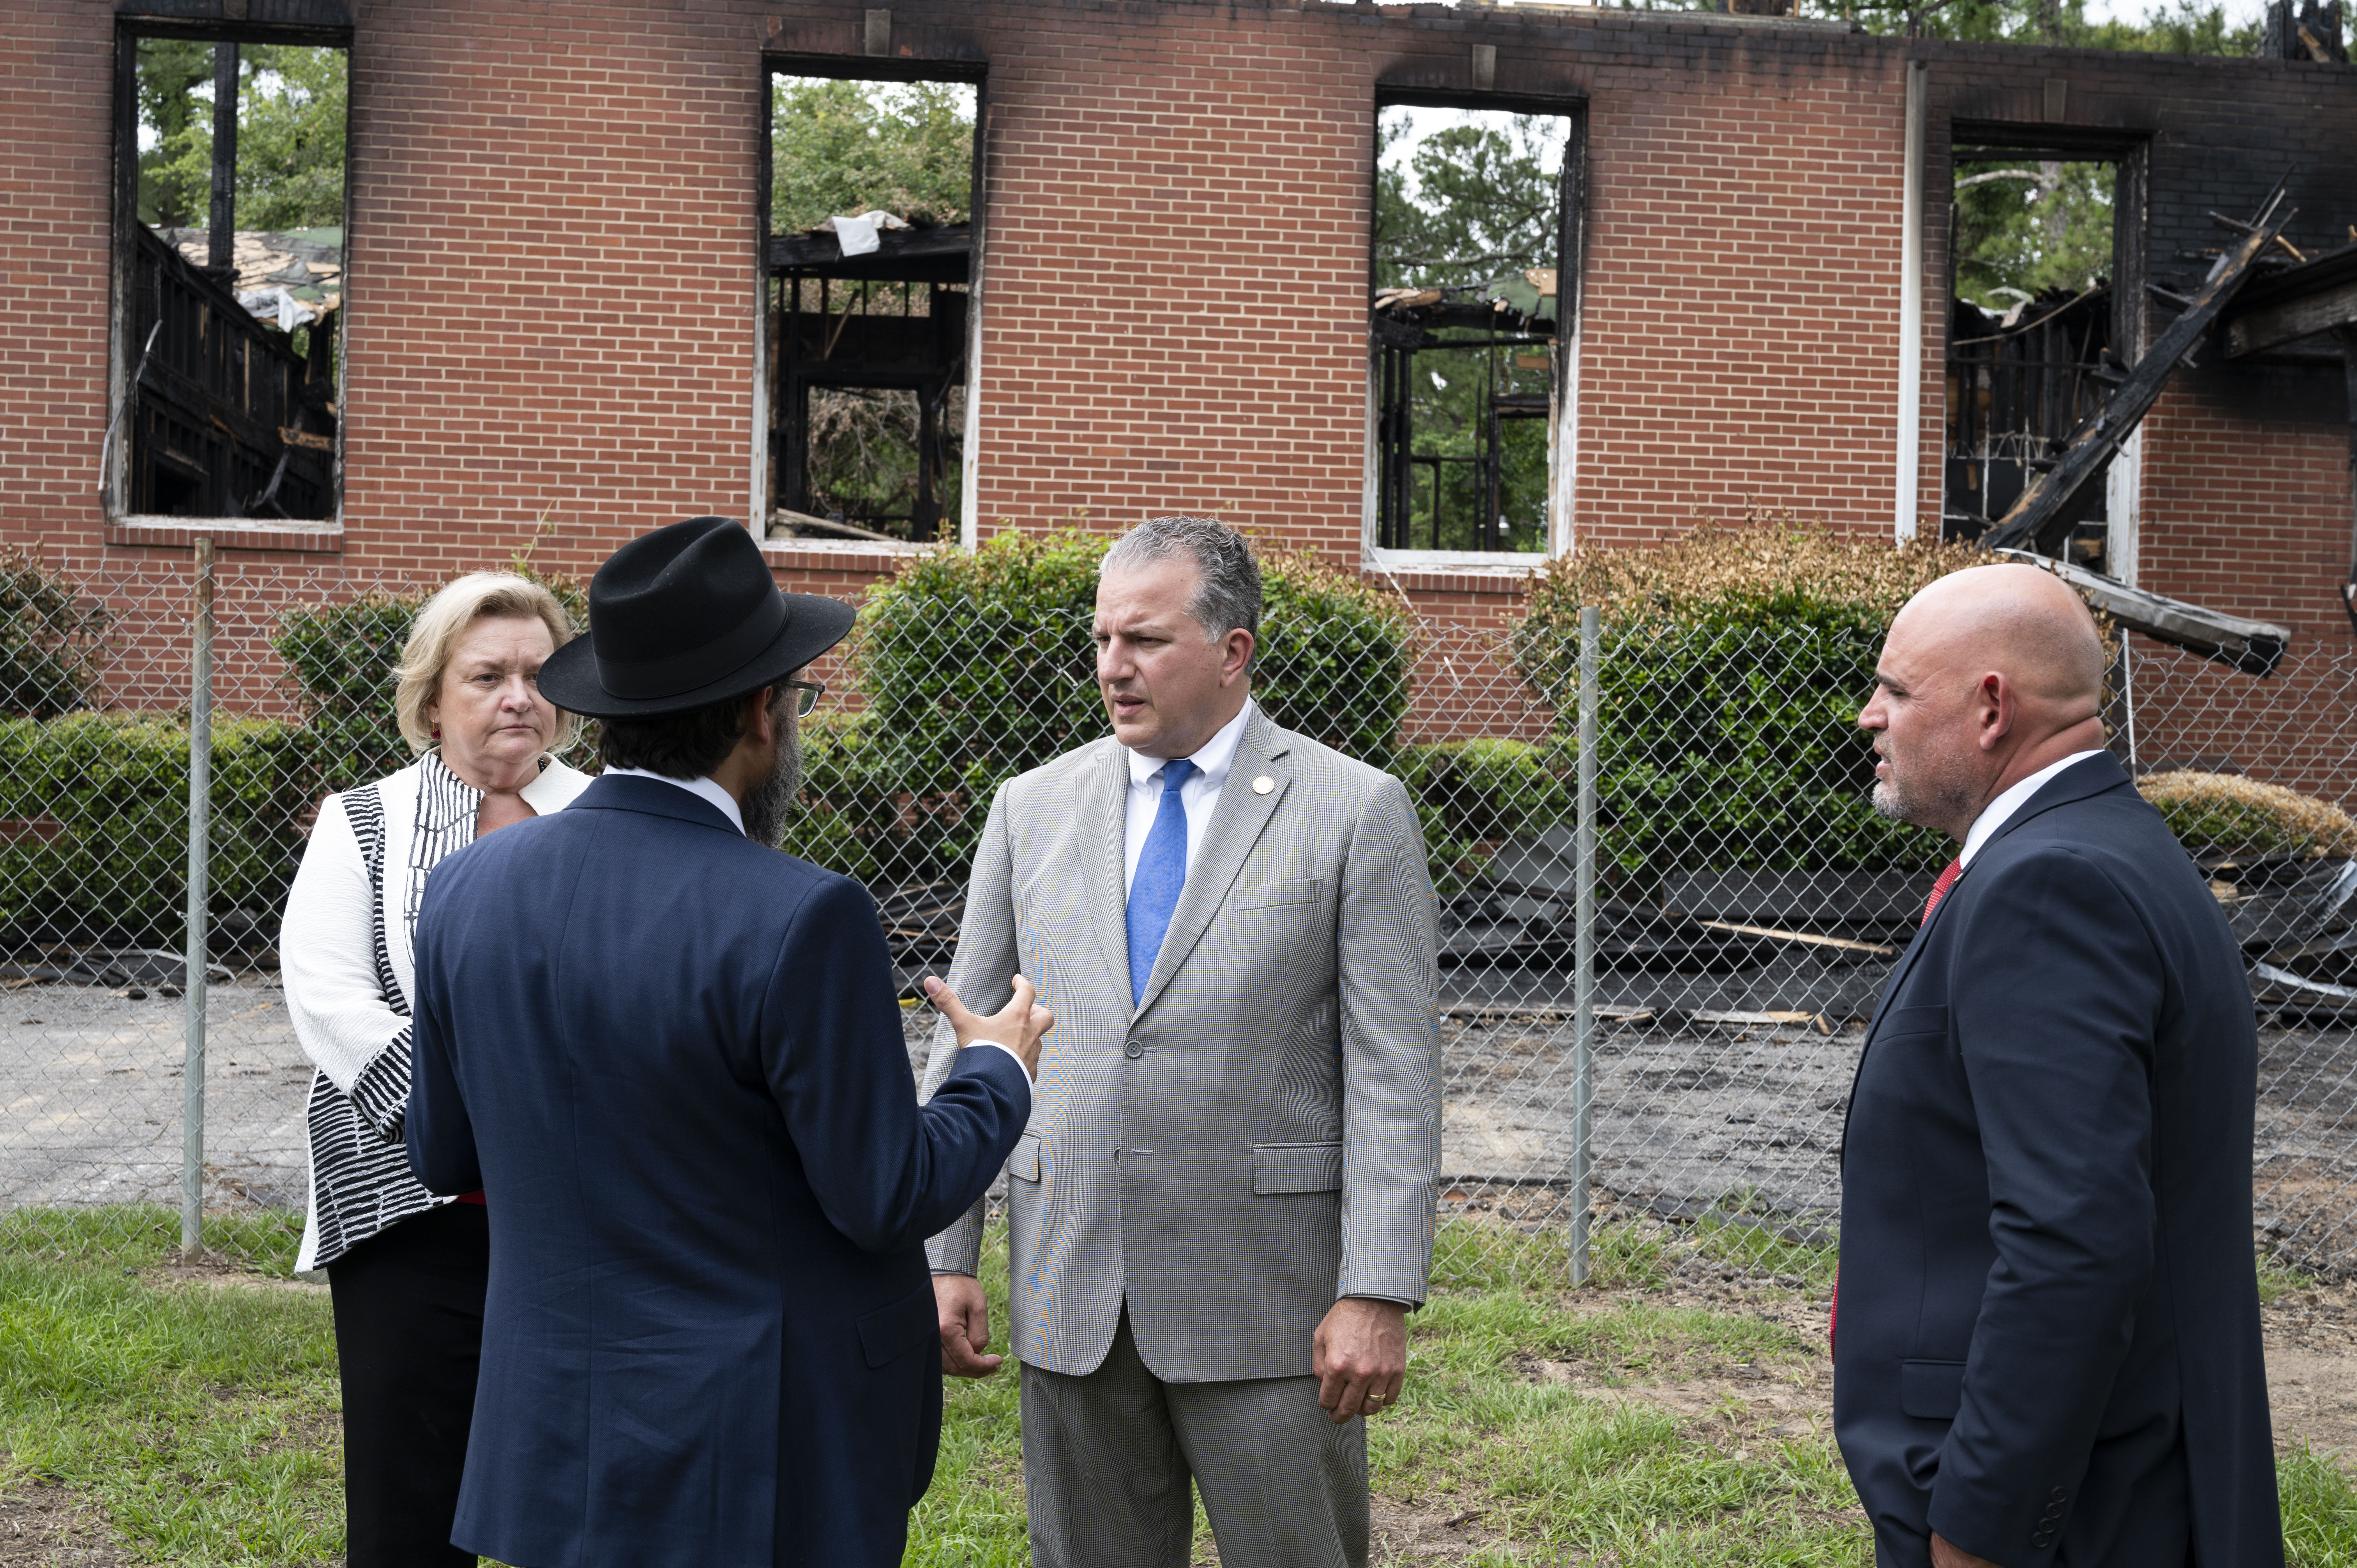  State Fire Marshal Jimmy Patronis Tours Site of Chabad of Tallahassee Fire with Israeli Consulate